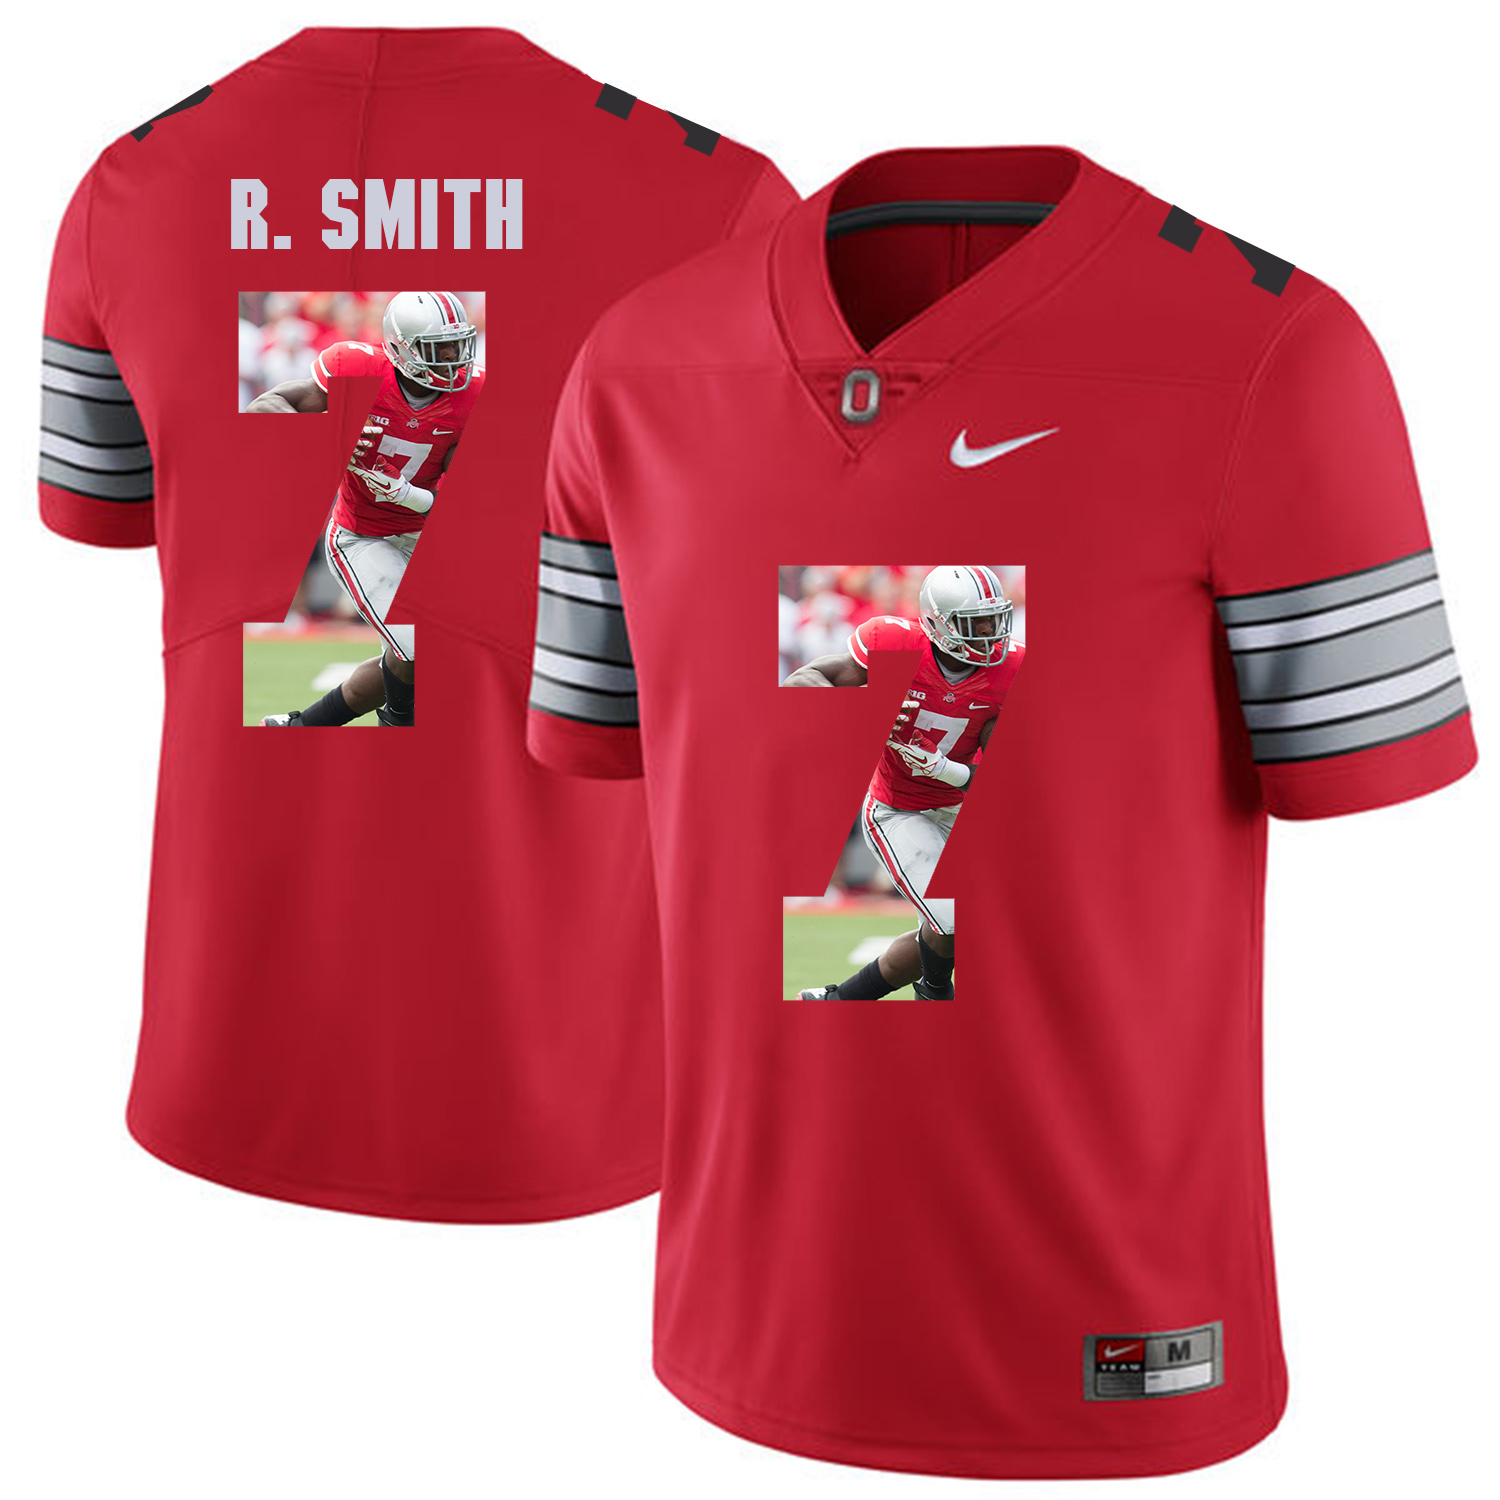 Men Ohio State 7 R.Smith Red Fashion Edition Customized NCAA Jerseys